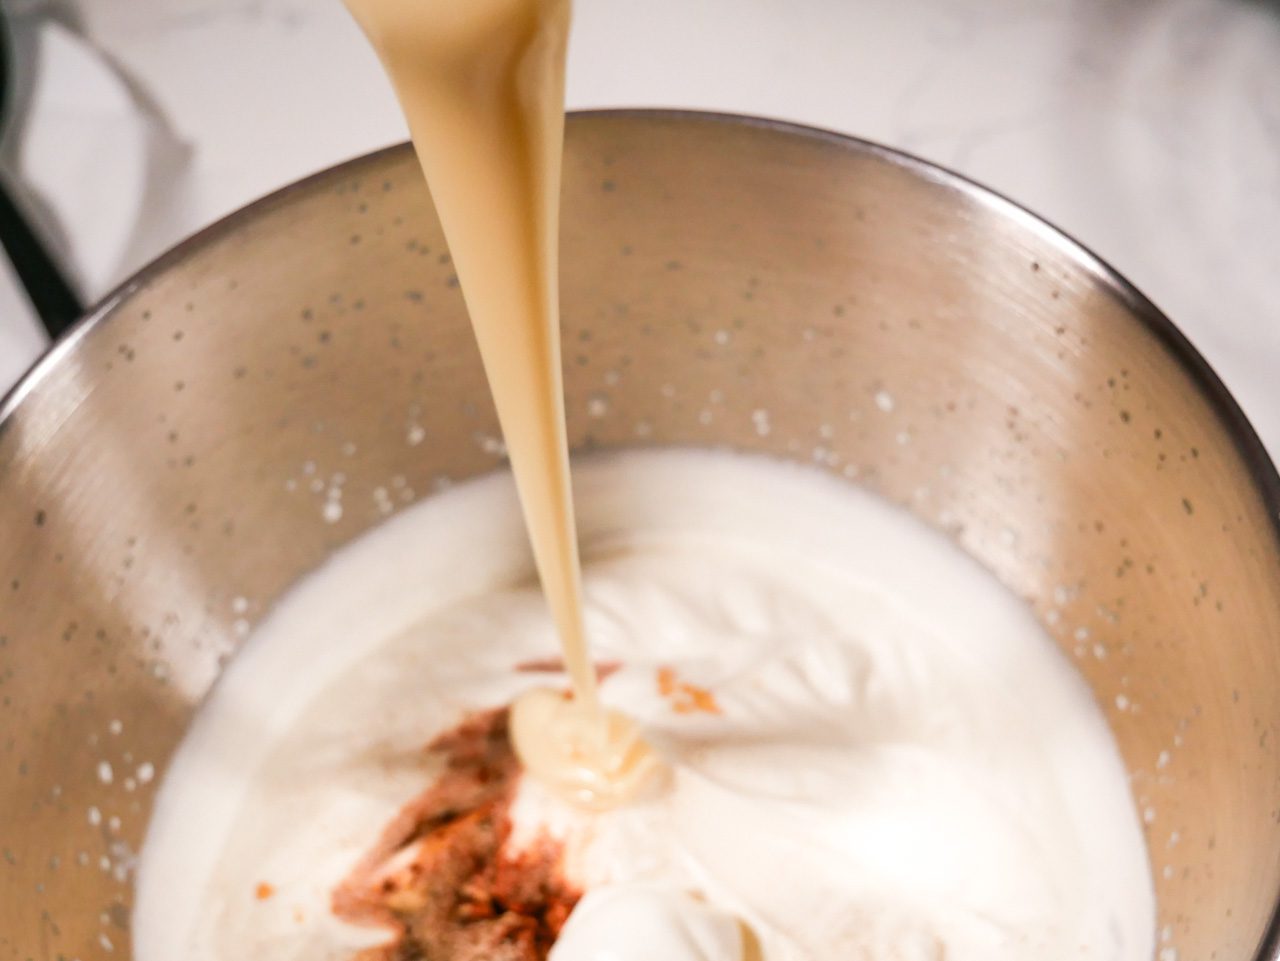 Pouring sweetened condensed milk into the ice cream base